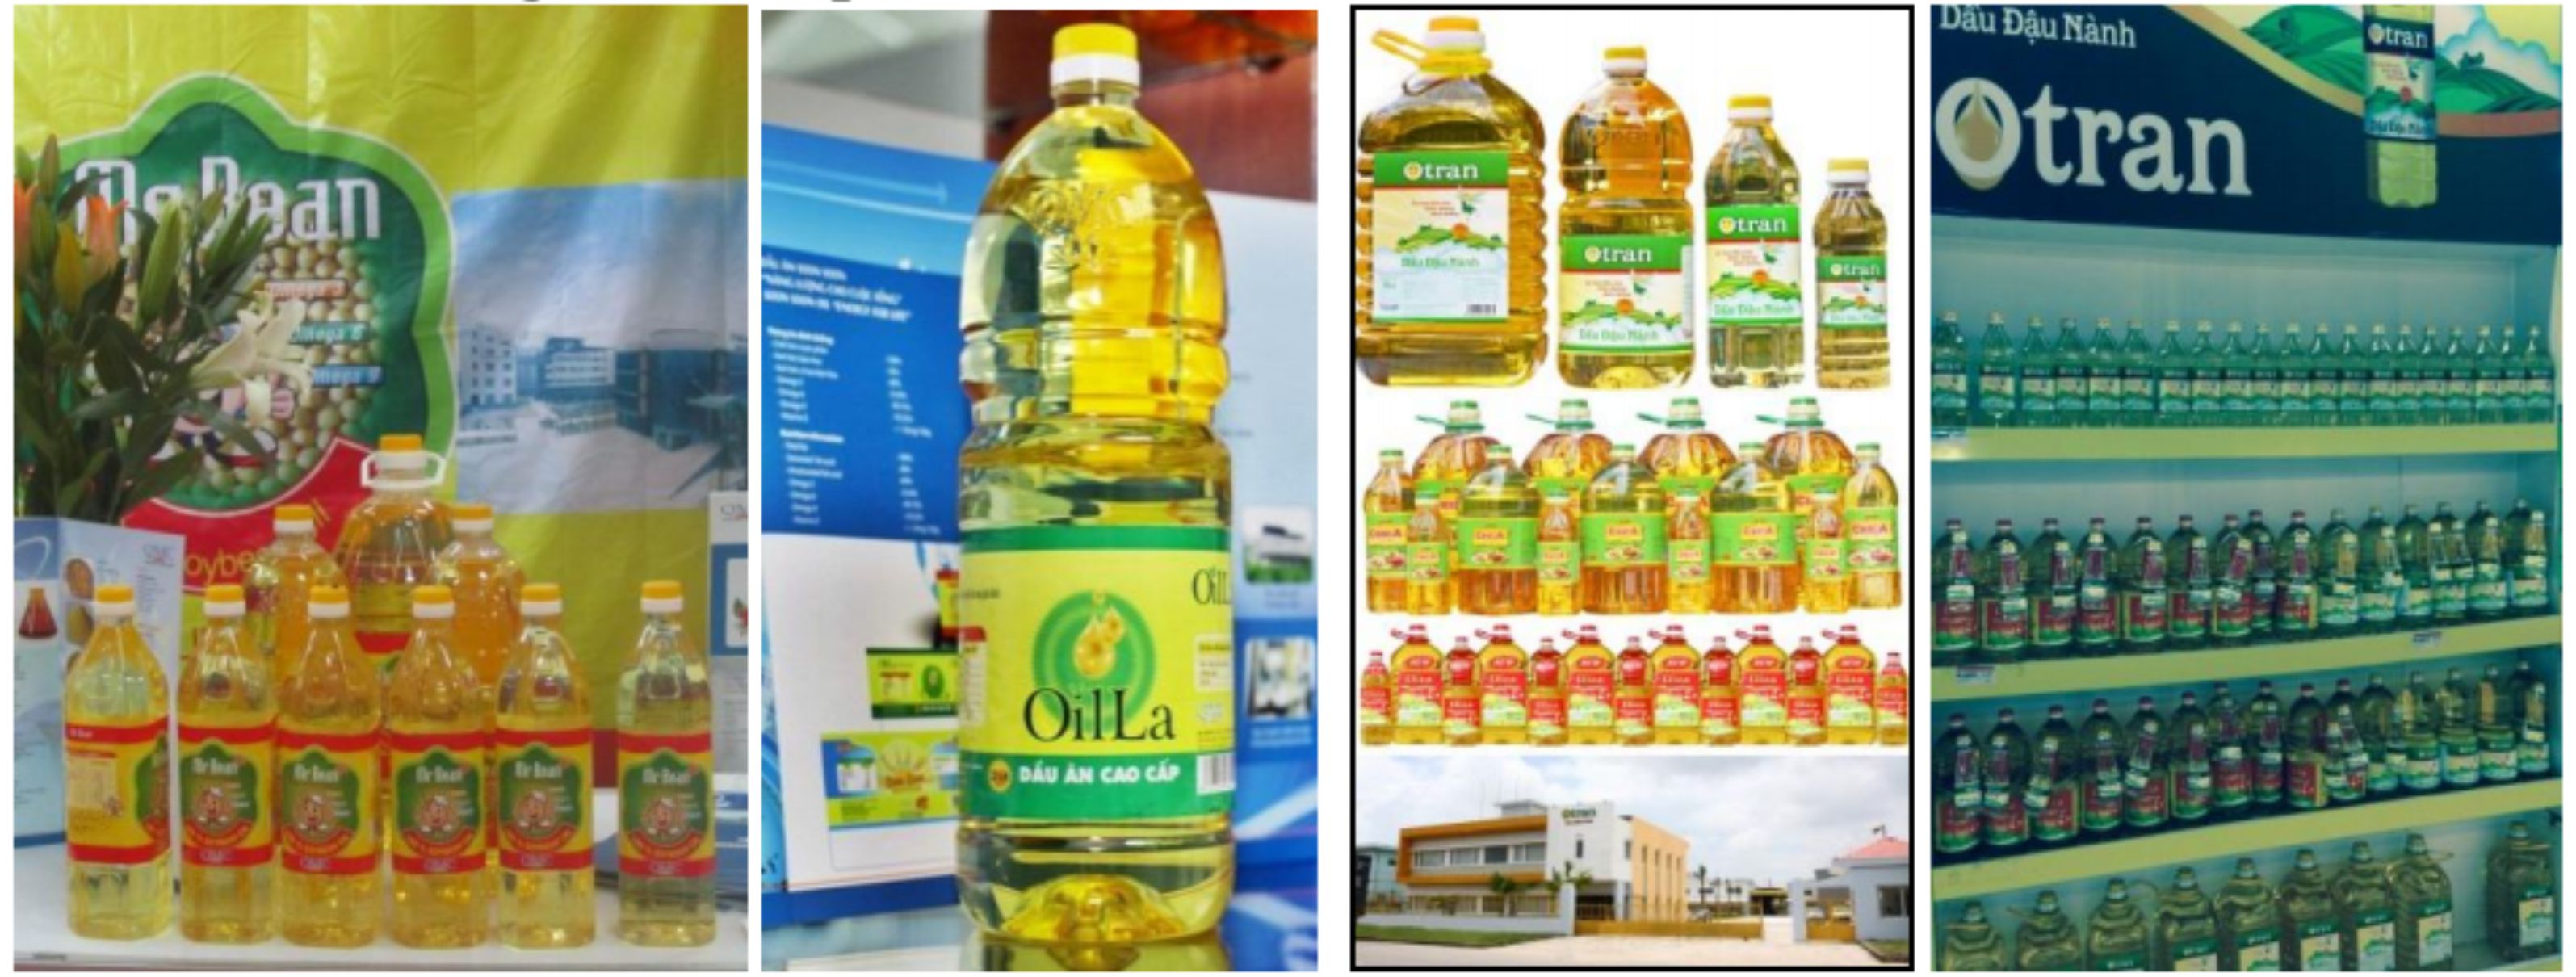 Production and consumption of vegetable oils in Vietnam to 2025